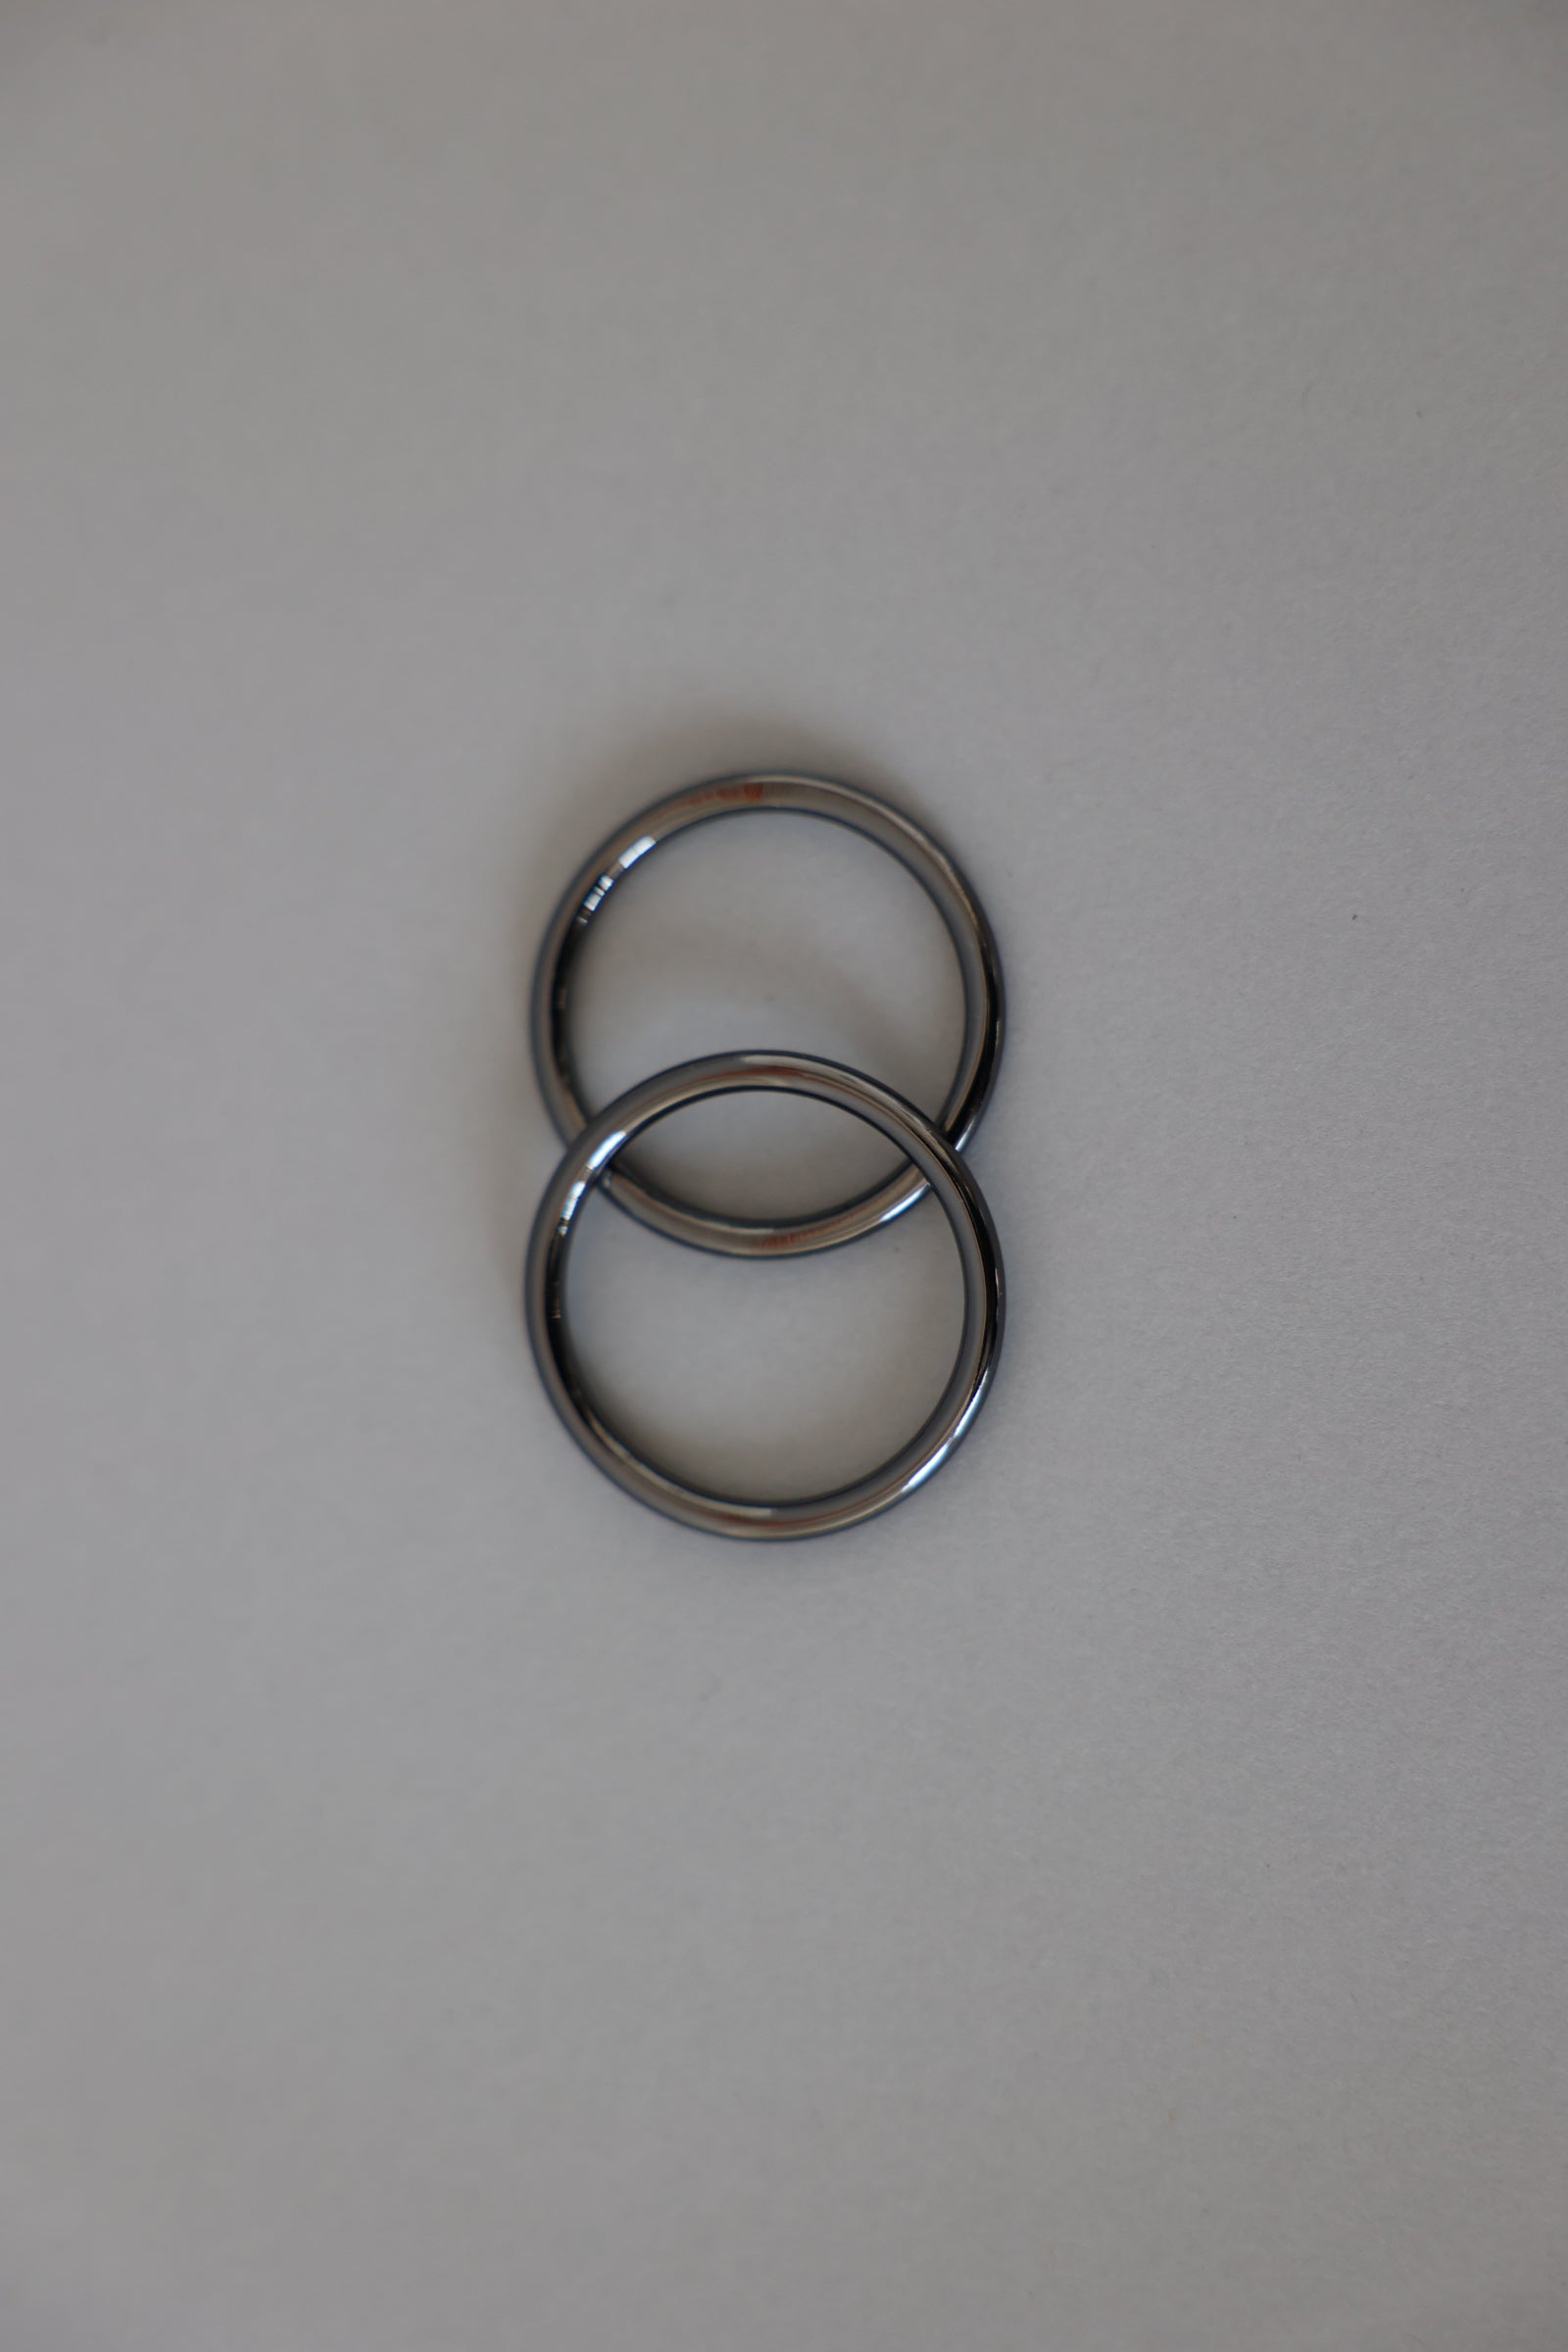 Metal O Ring Seamless Welded O-Ring Multi-Purpose 304 Stainless Steel Rings  Smooth Round Ring for Hanging Flower Basket Crafts, 8 x 100 mm, 2 Pieces :  Amazon.in: Home & Kitchen